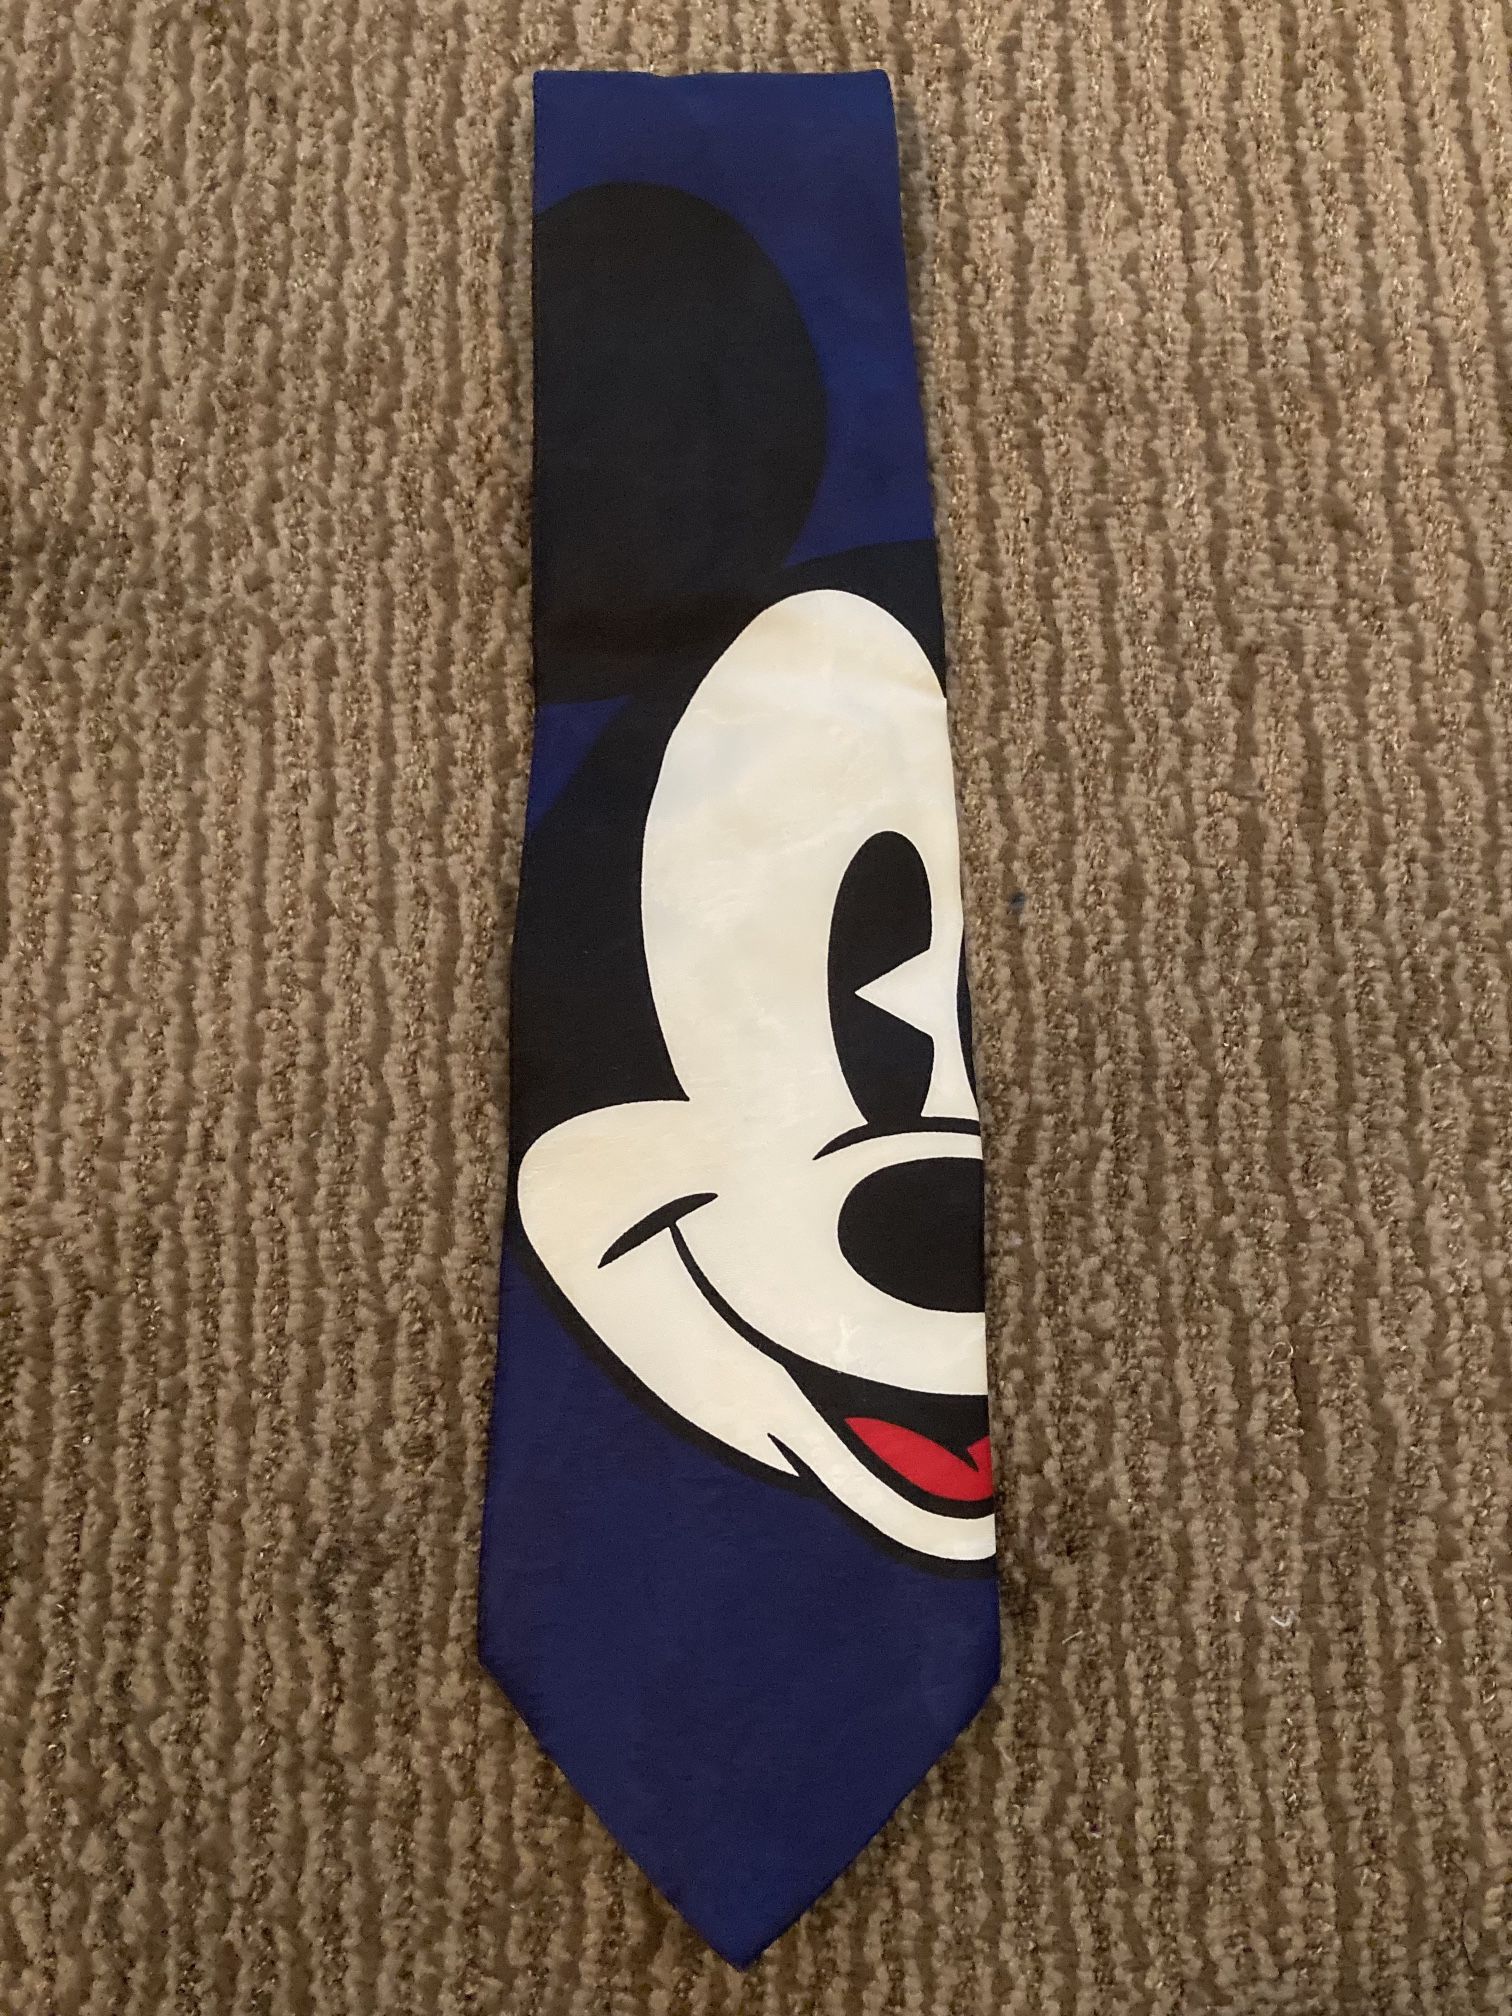 *Super Rare BNWT Vintage Disney Mickey Mouse Tie Made In Italy!